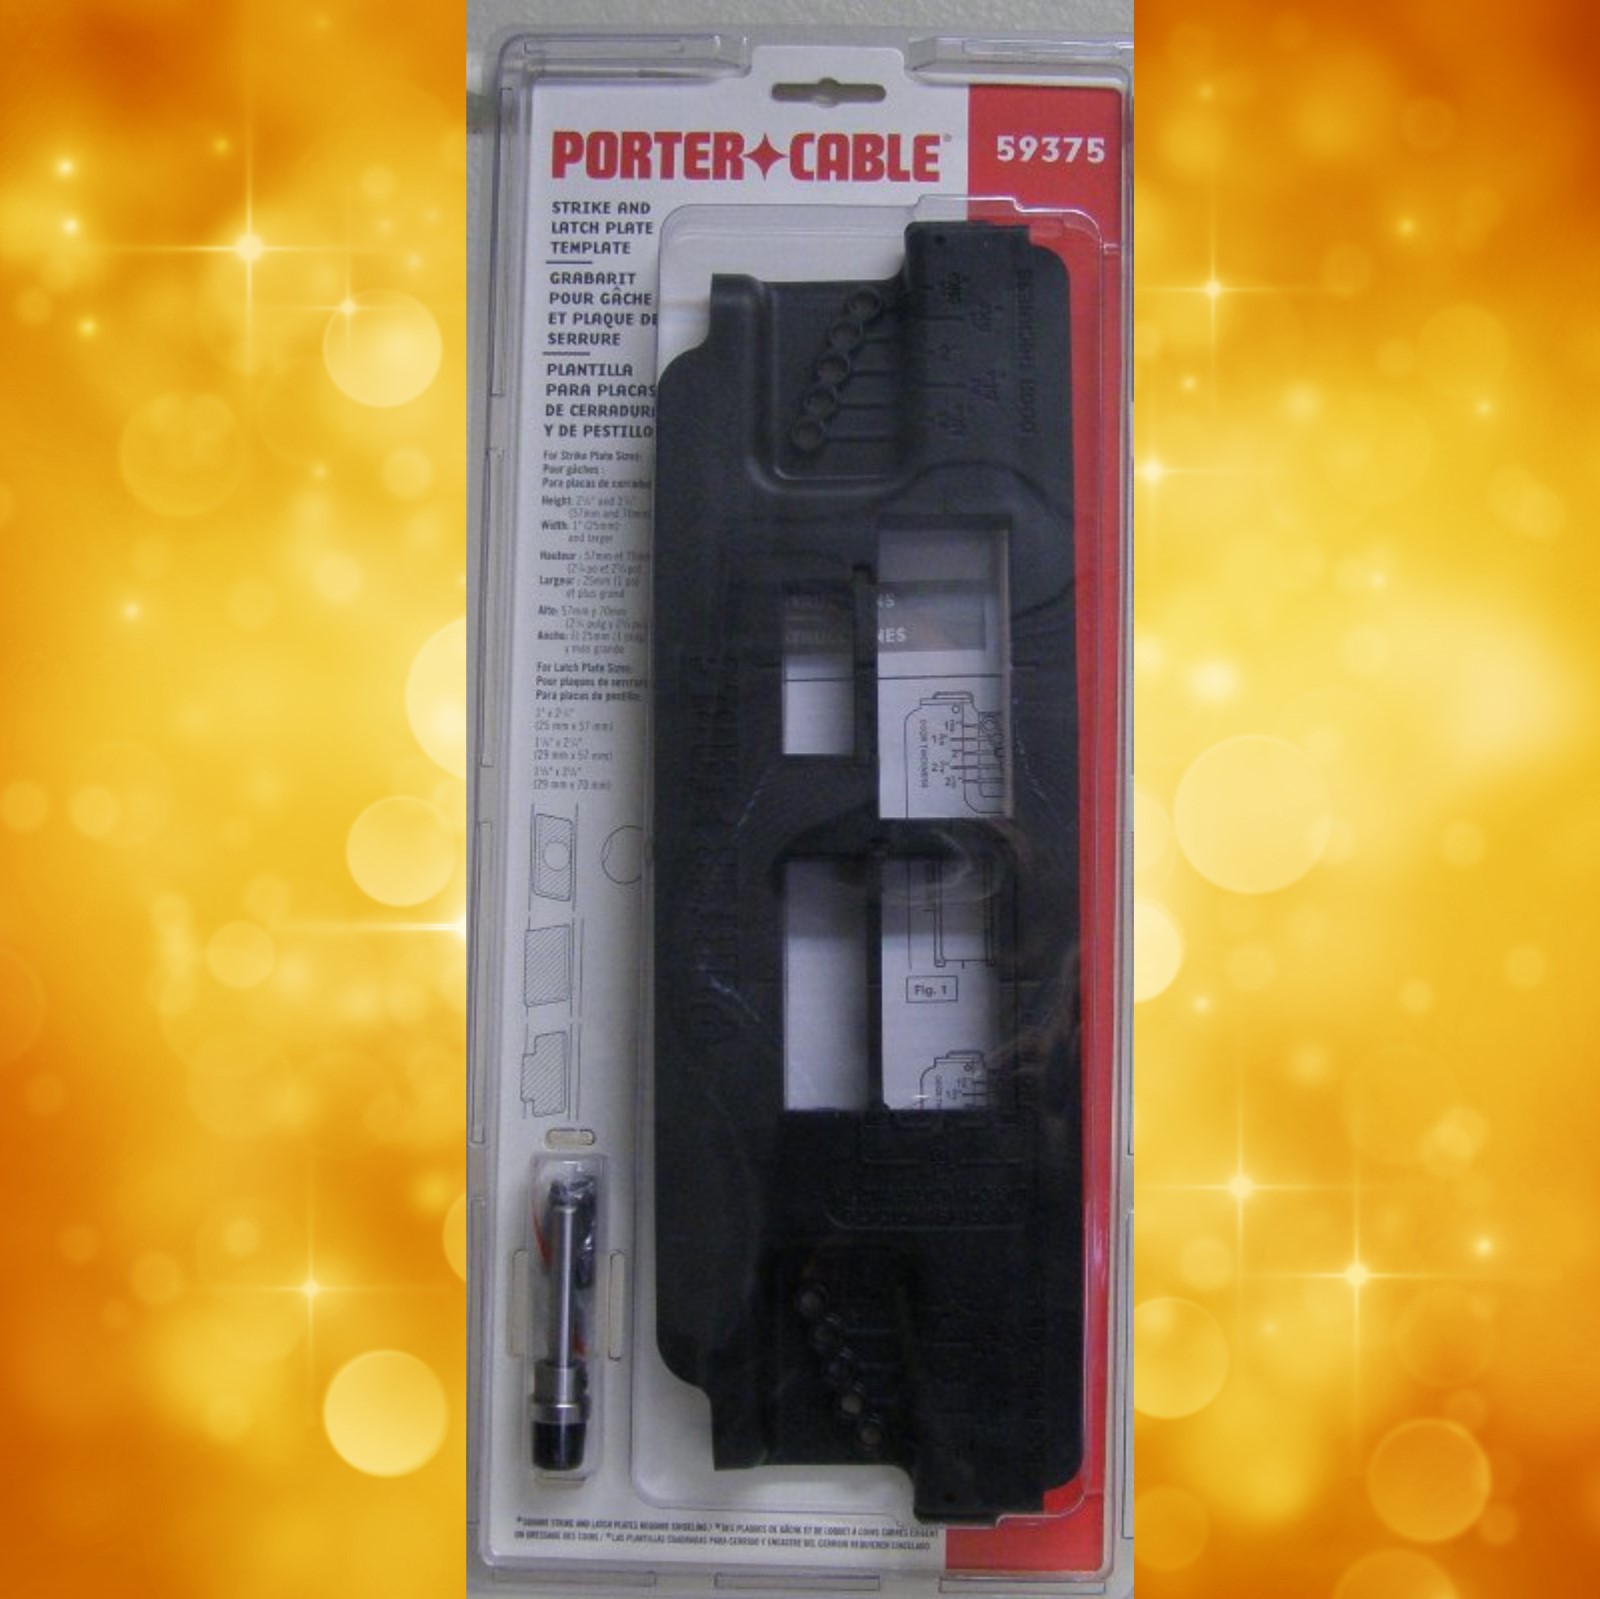 Porter-Cable Strike and Latch Templet 59375